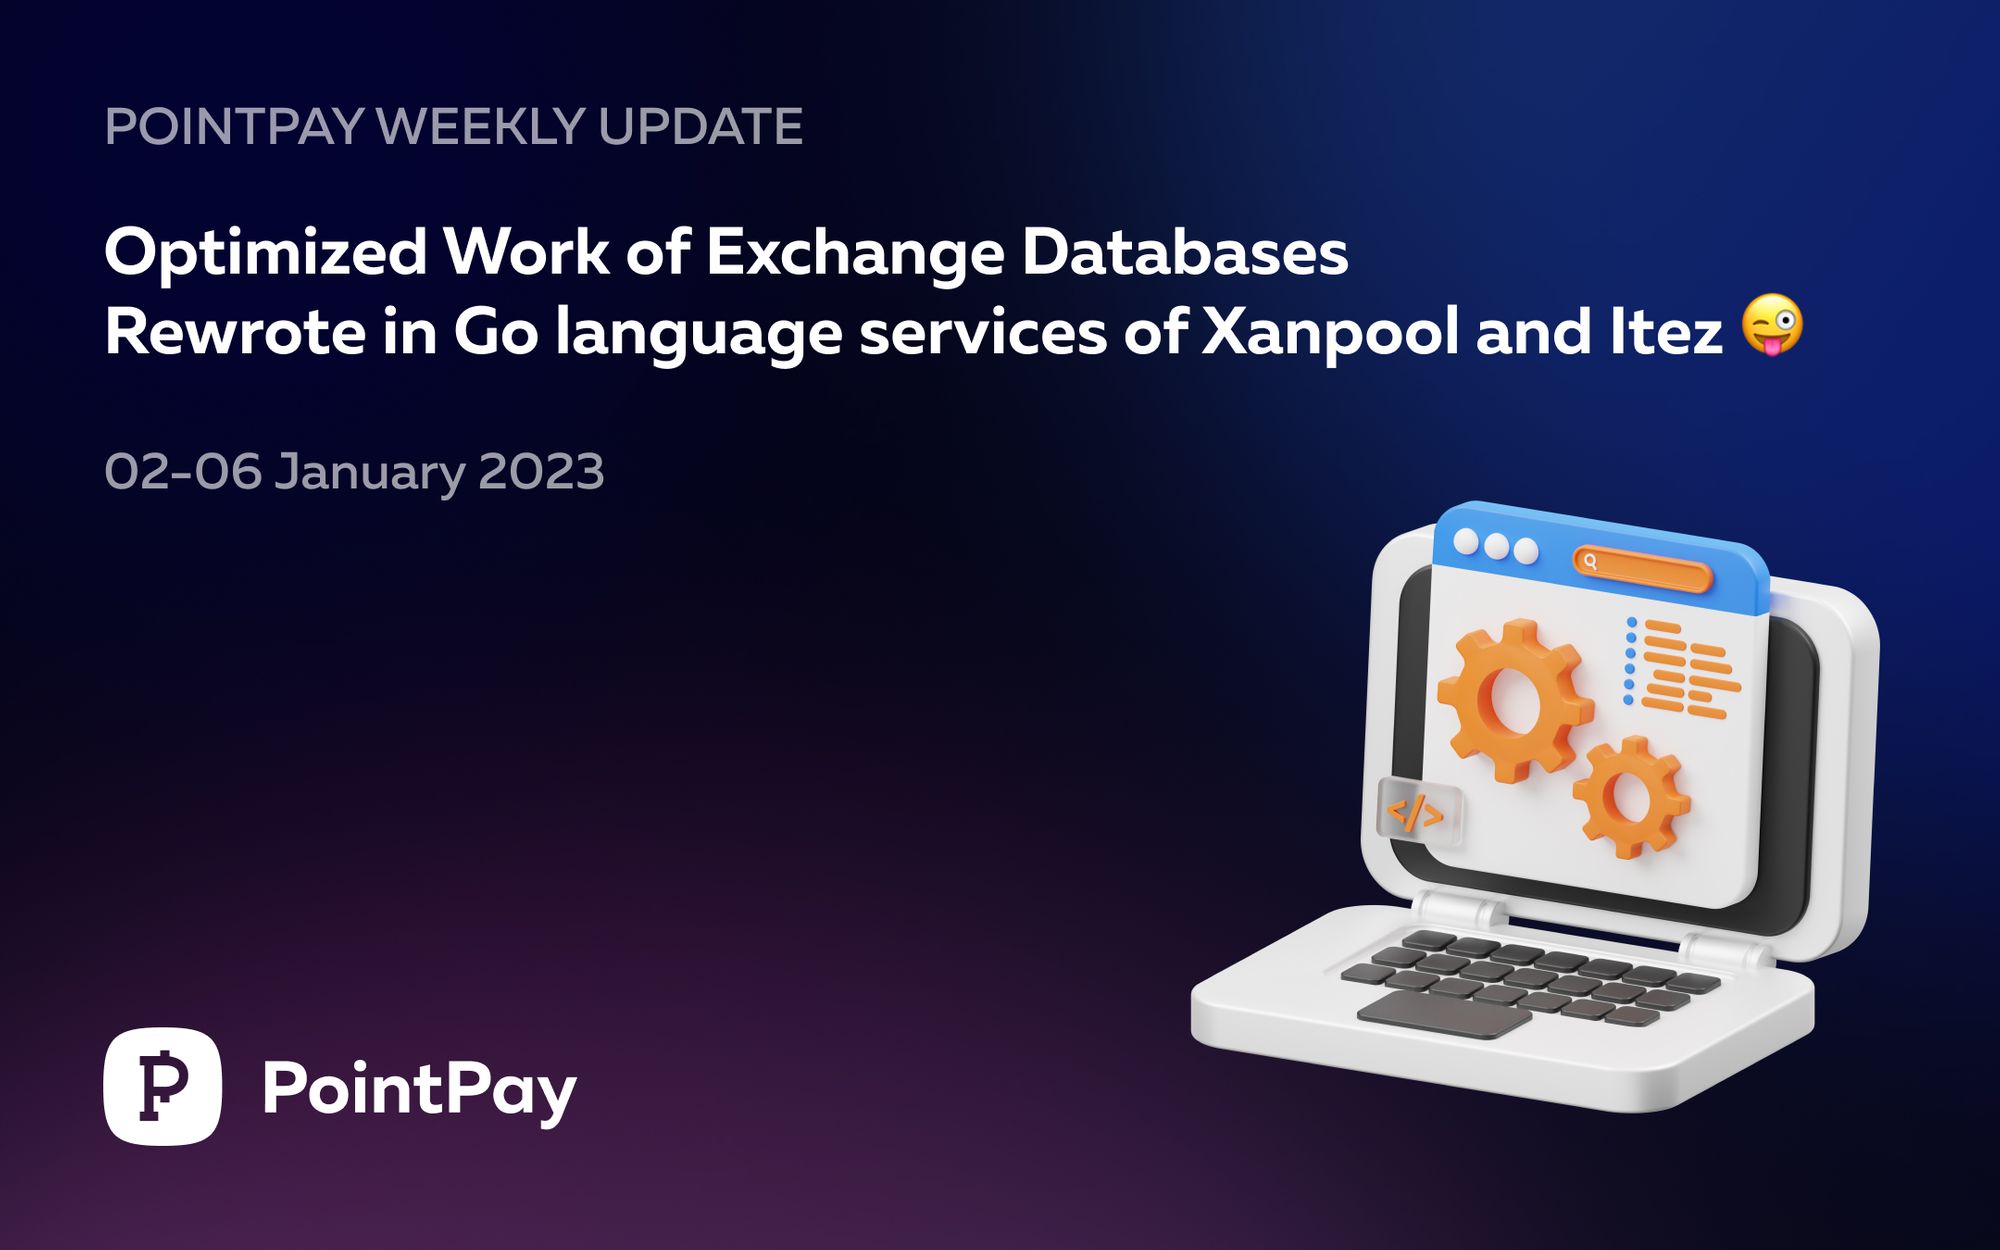 PointPay Weekly Update (2 - 6 January 2023)